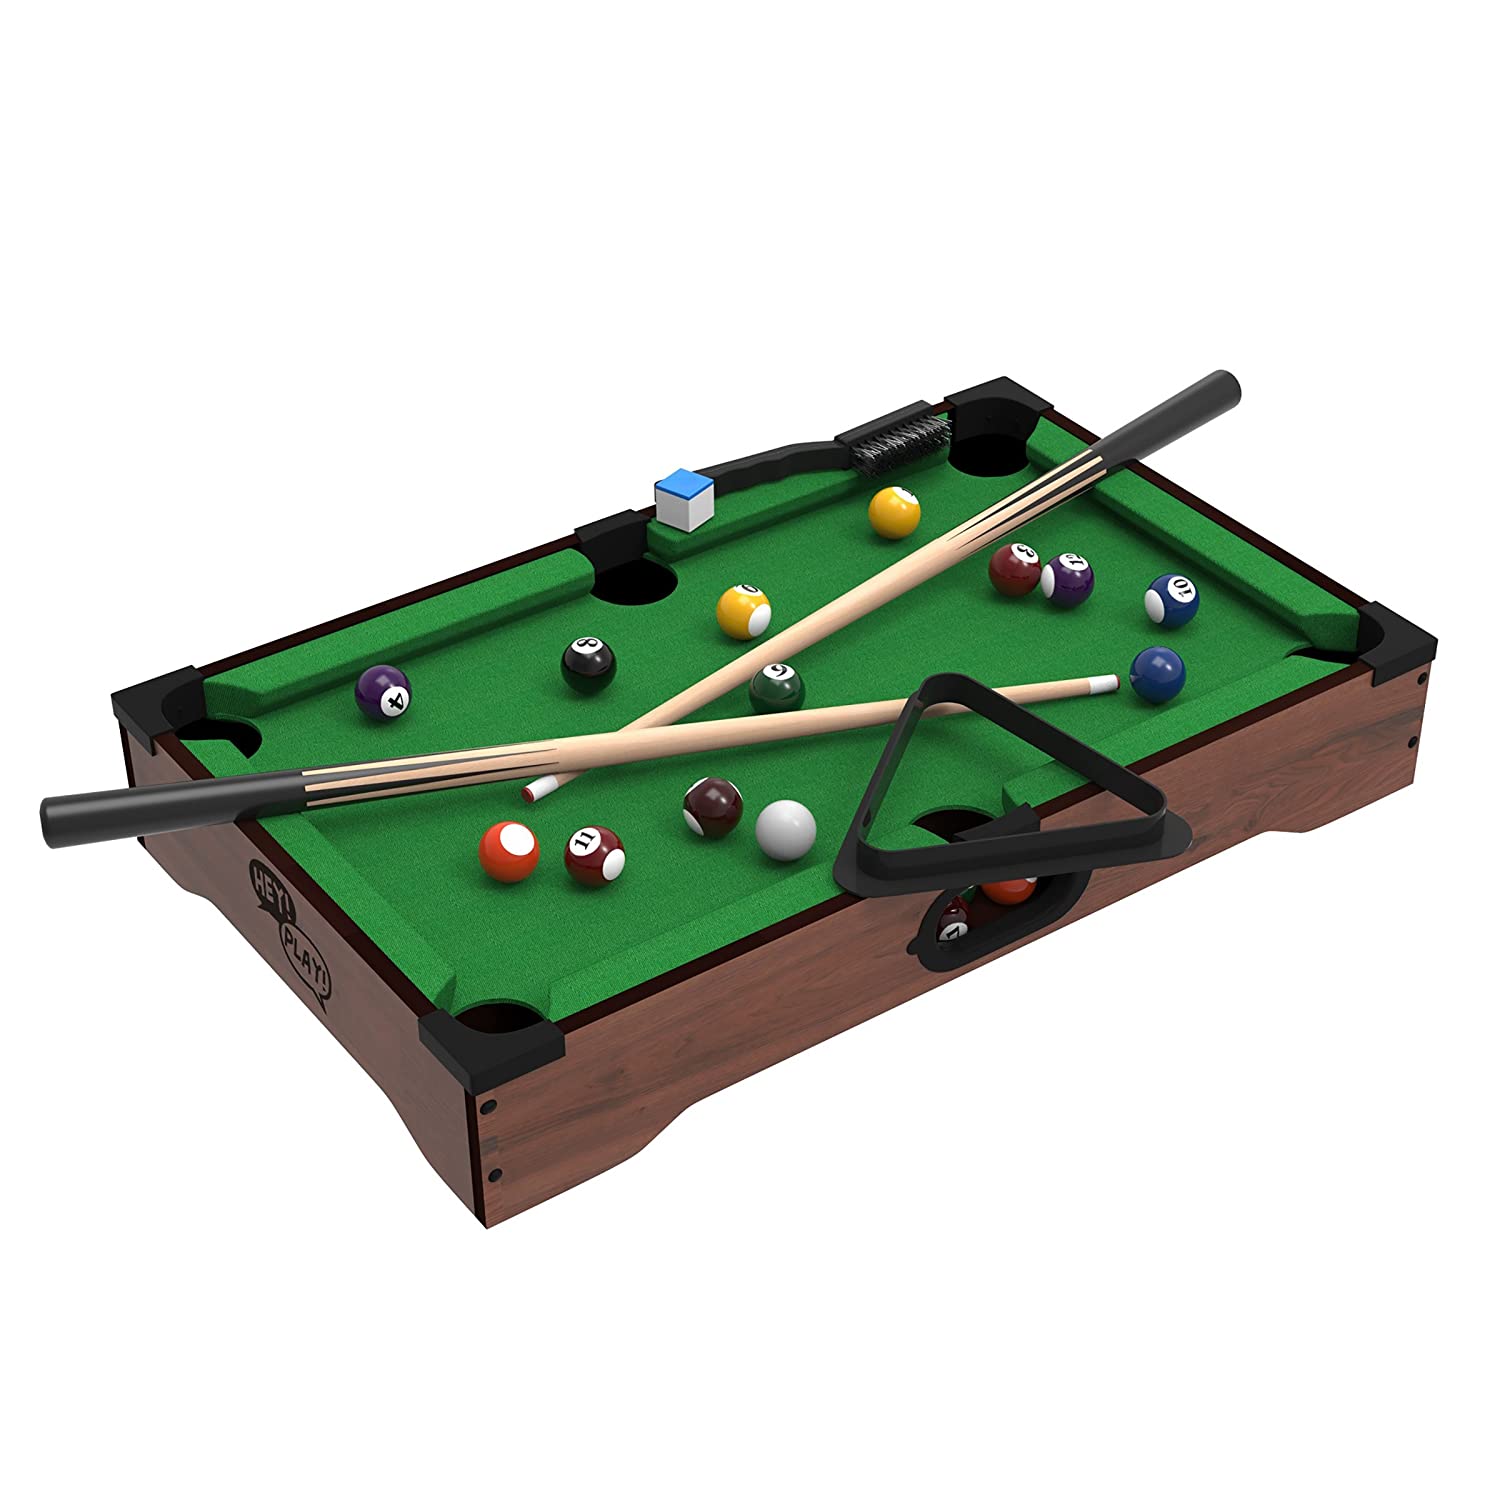 Mini Tabletop Pool Set- Billiards Game Includes Game Balls, Sticks, Chalk, Brush and Triangle